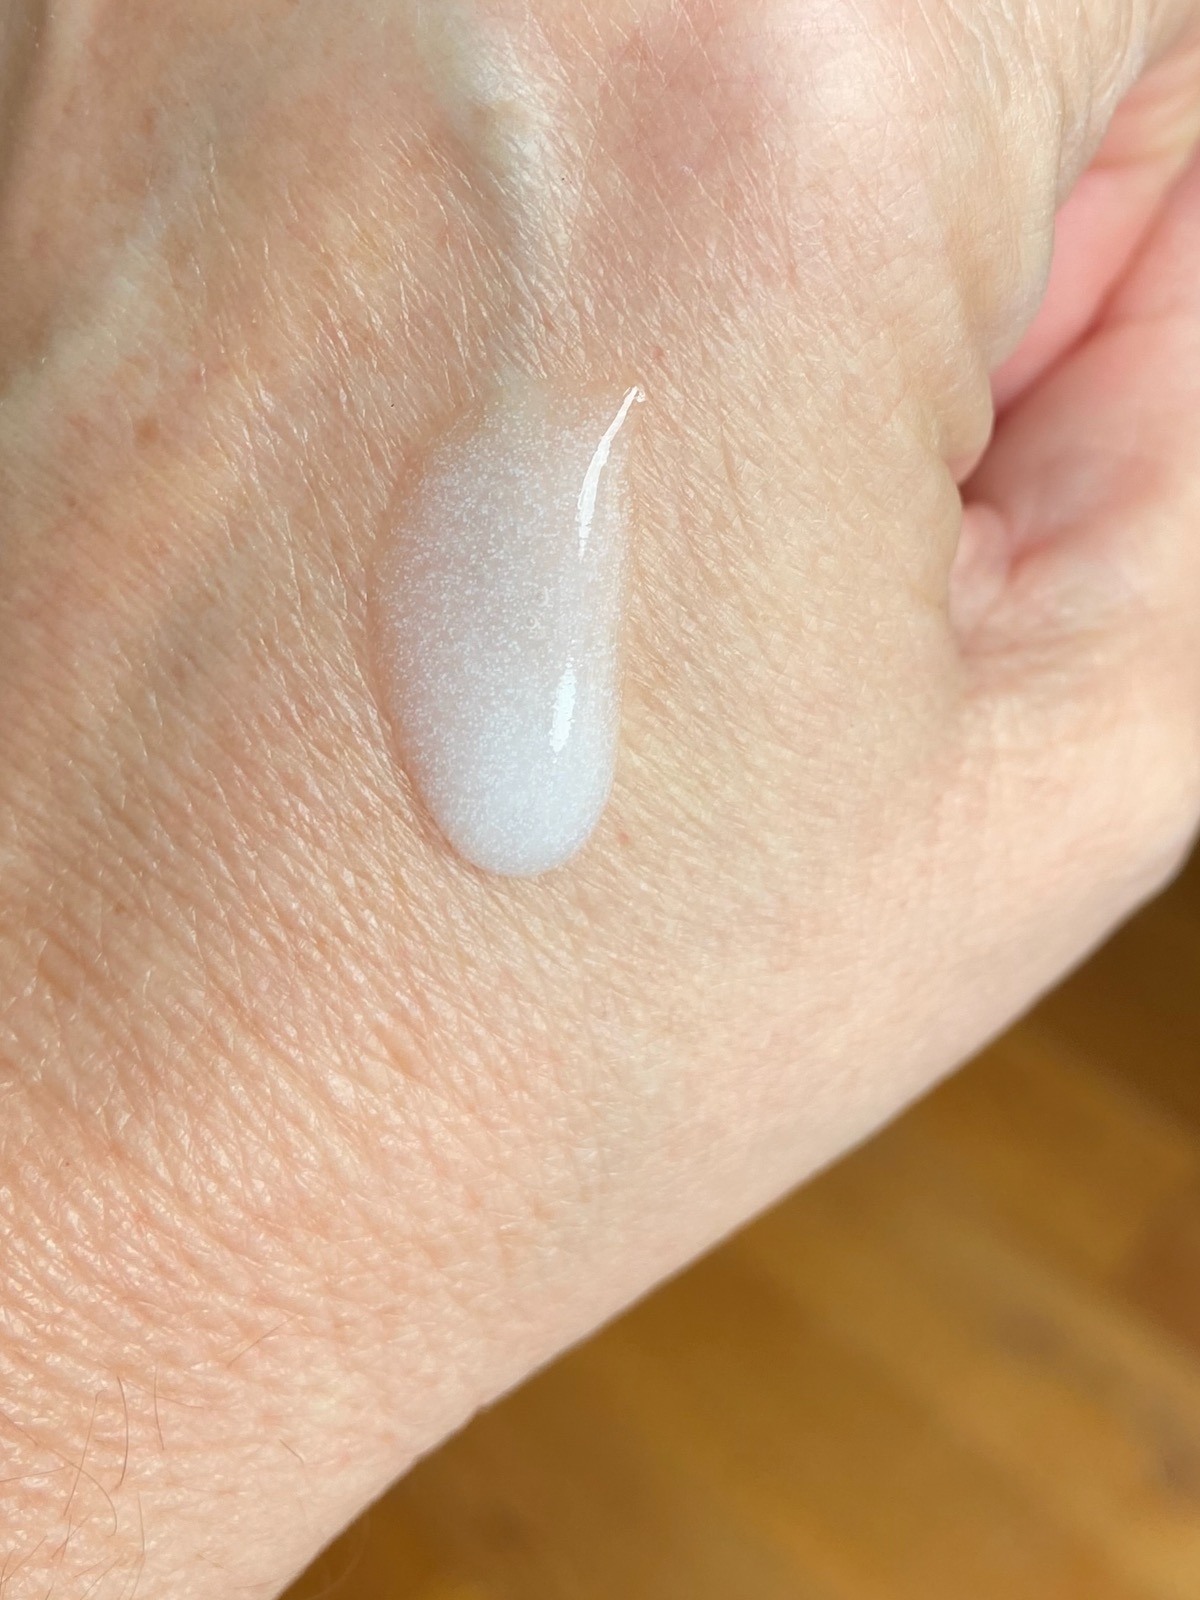 HighDroxy Calm Cleanser Swatch